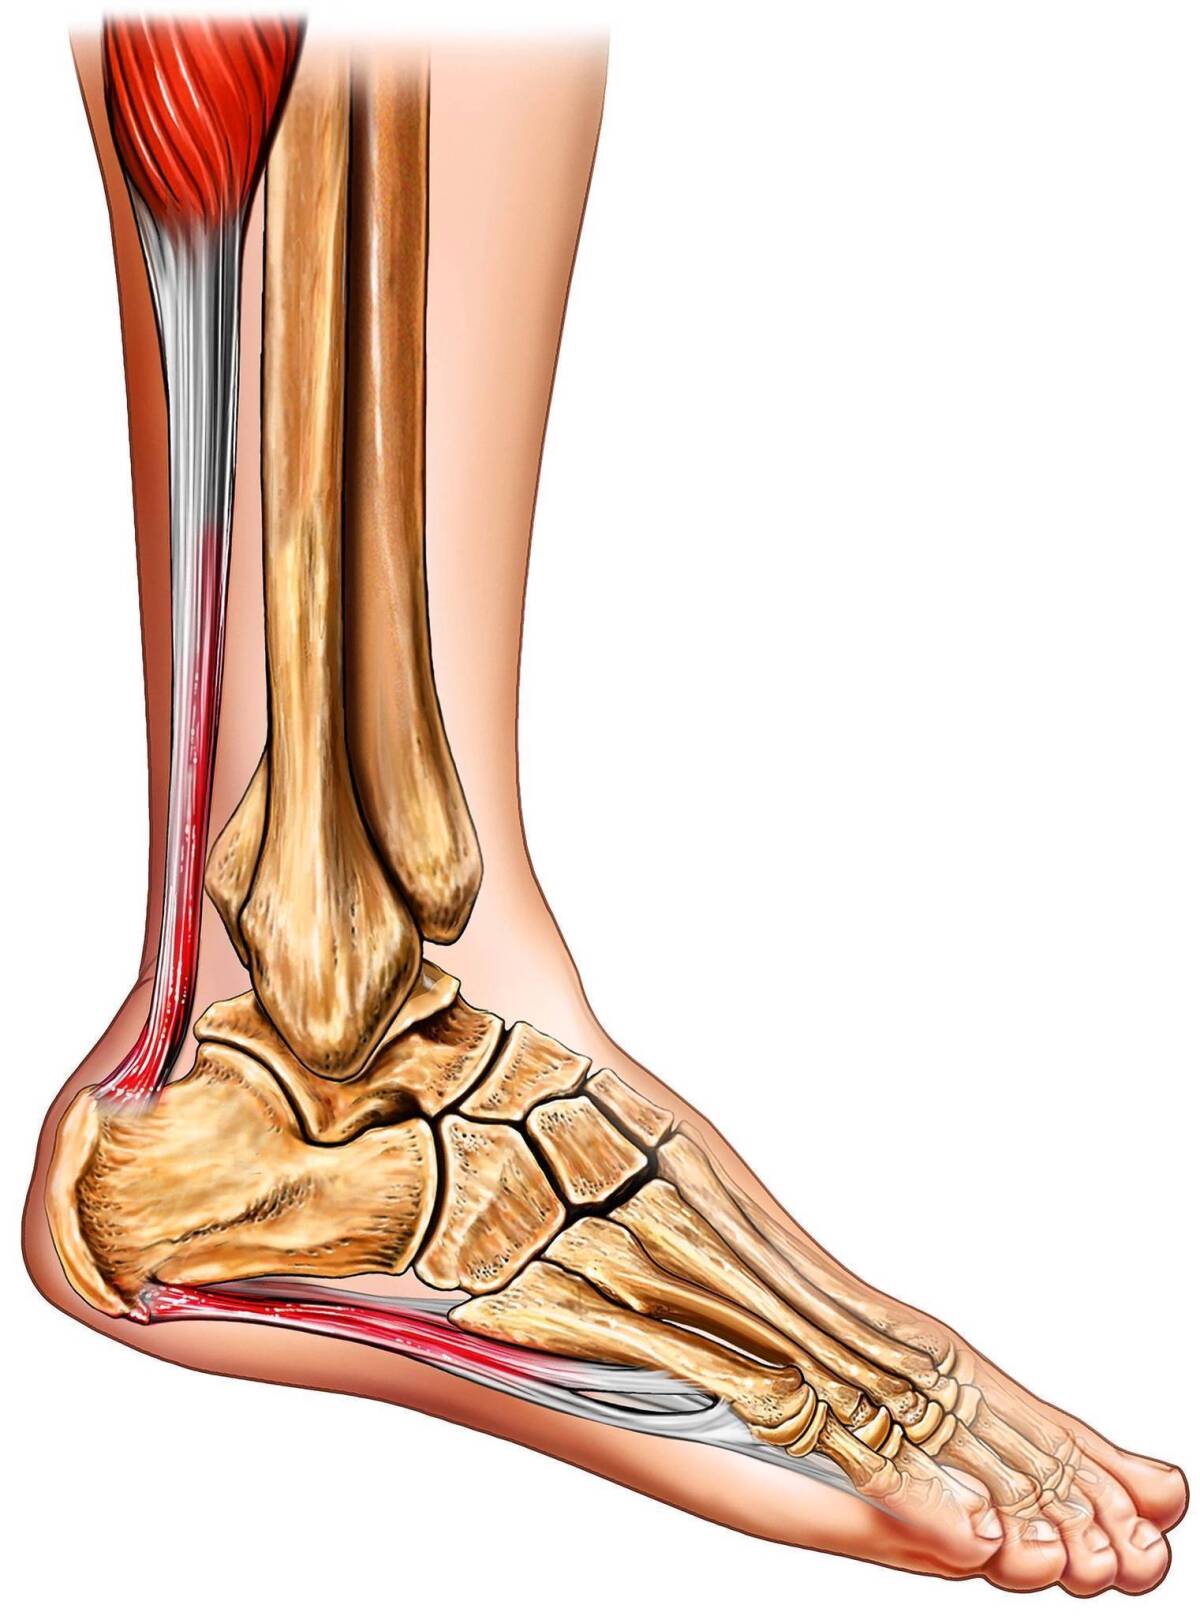 A medical illustration shows a foot with plantar fasciitis, inflammation of the band of tissue that runs from the heel along the bottom of the foot.